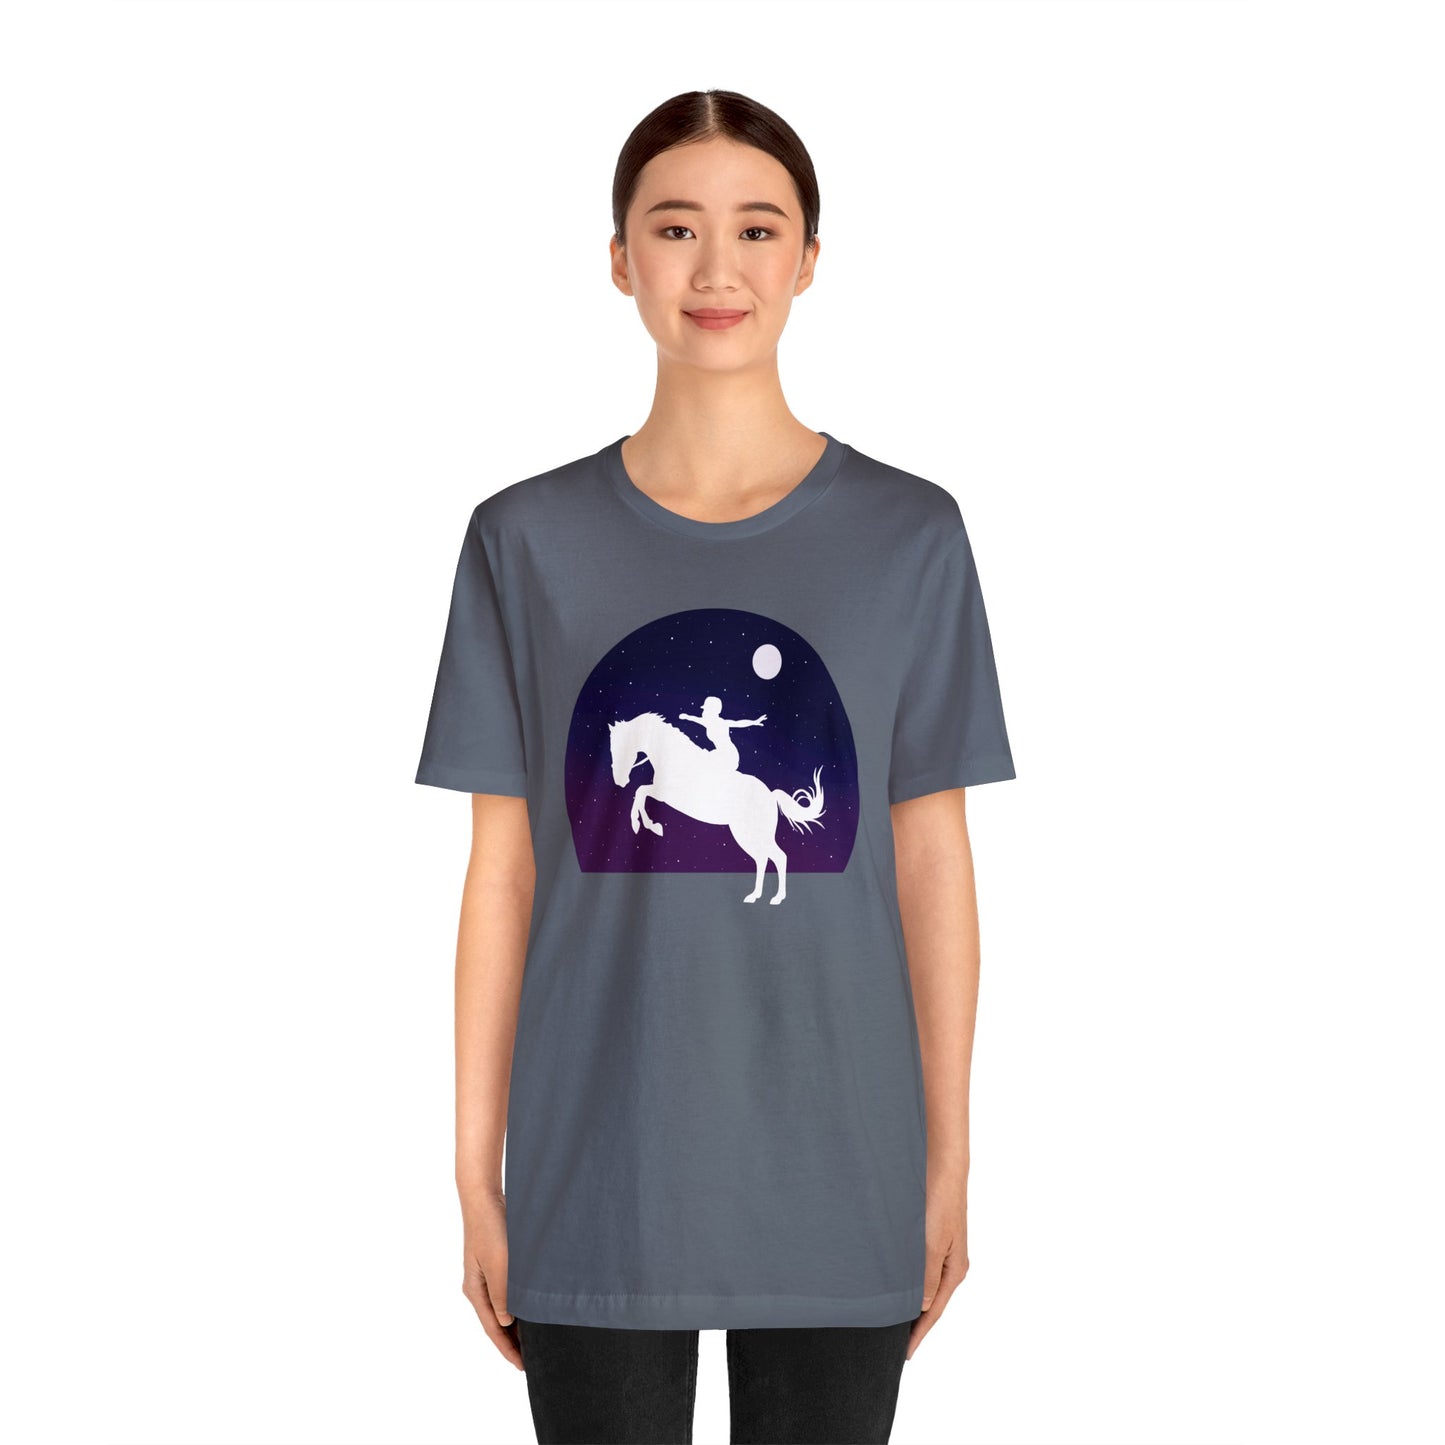 Horses Give Us Wings - Unisex Short Sleeve Jersey Tee